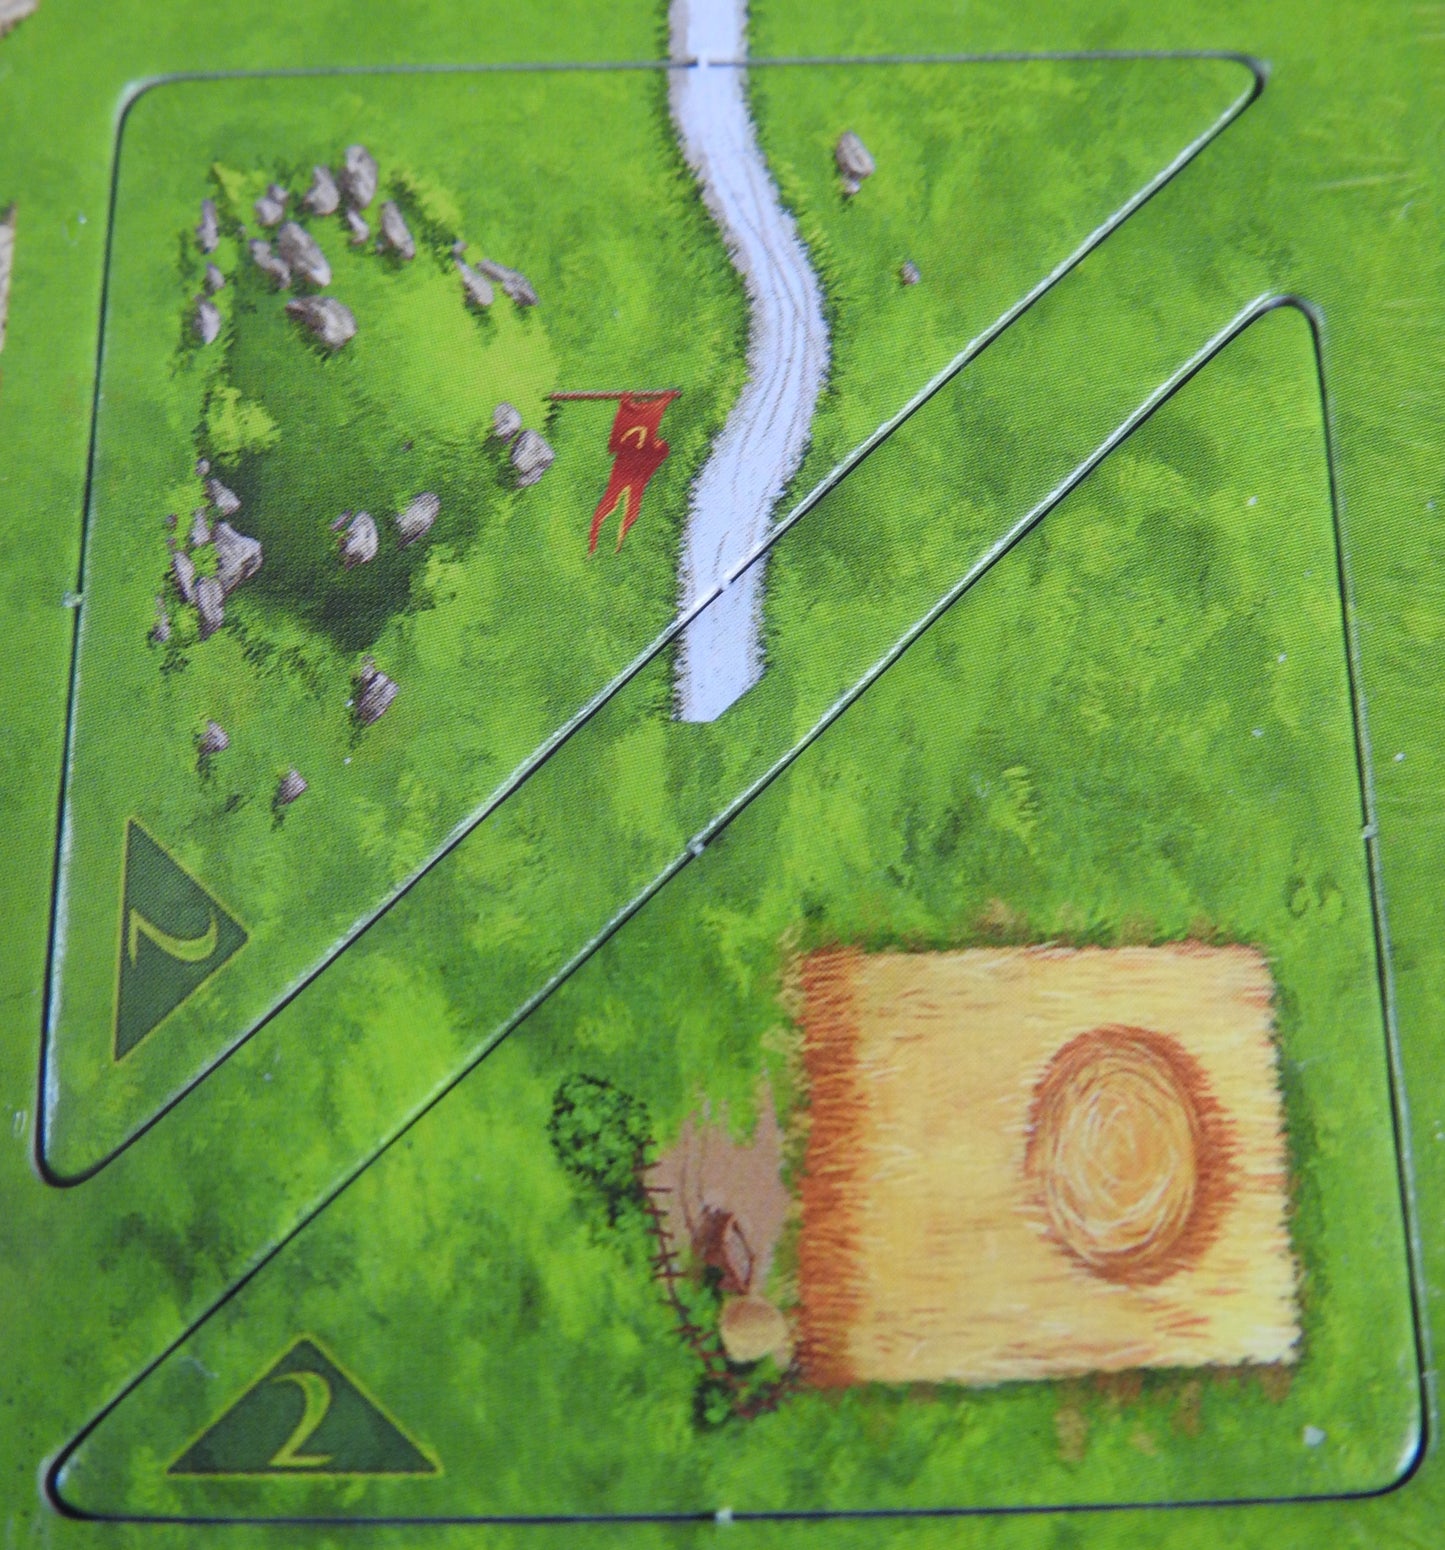 Close-up of 2 tiles showing a crop circle, road and hill.